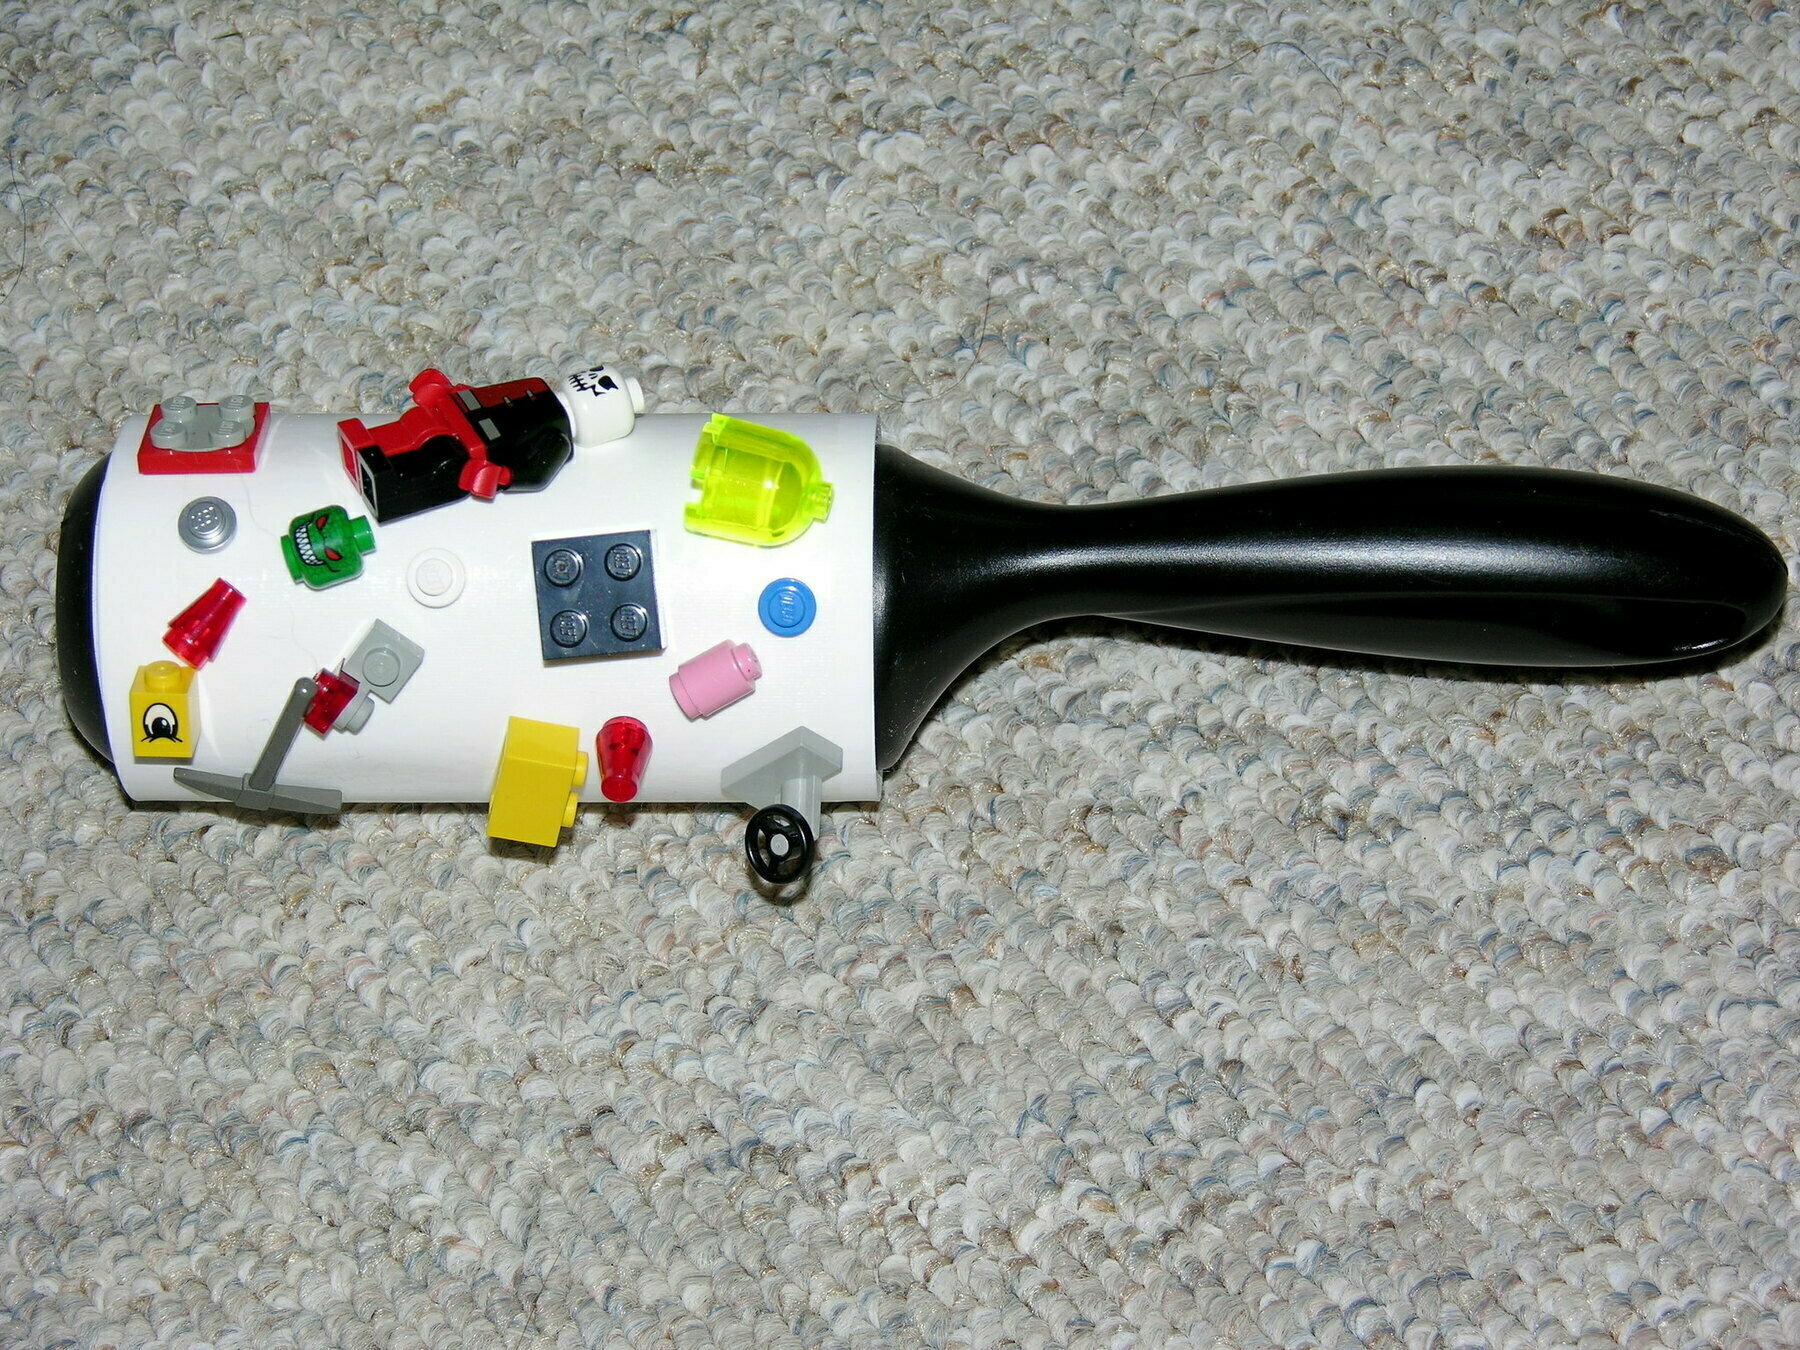 Lint Roller with Lego on it - CCA https://www.flickr.com/photos/8331761@N07/2502131903 musicmoon@rogers.com DSCN0627